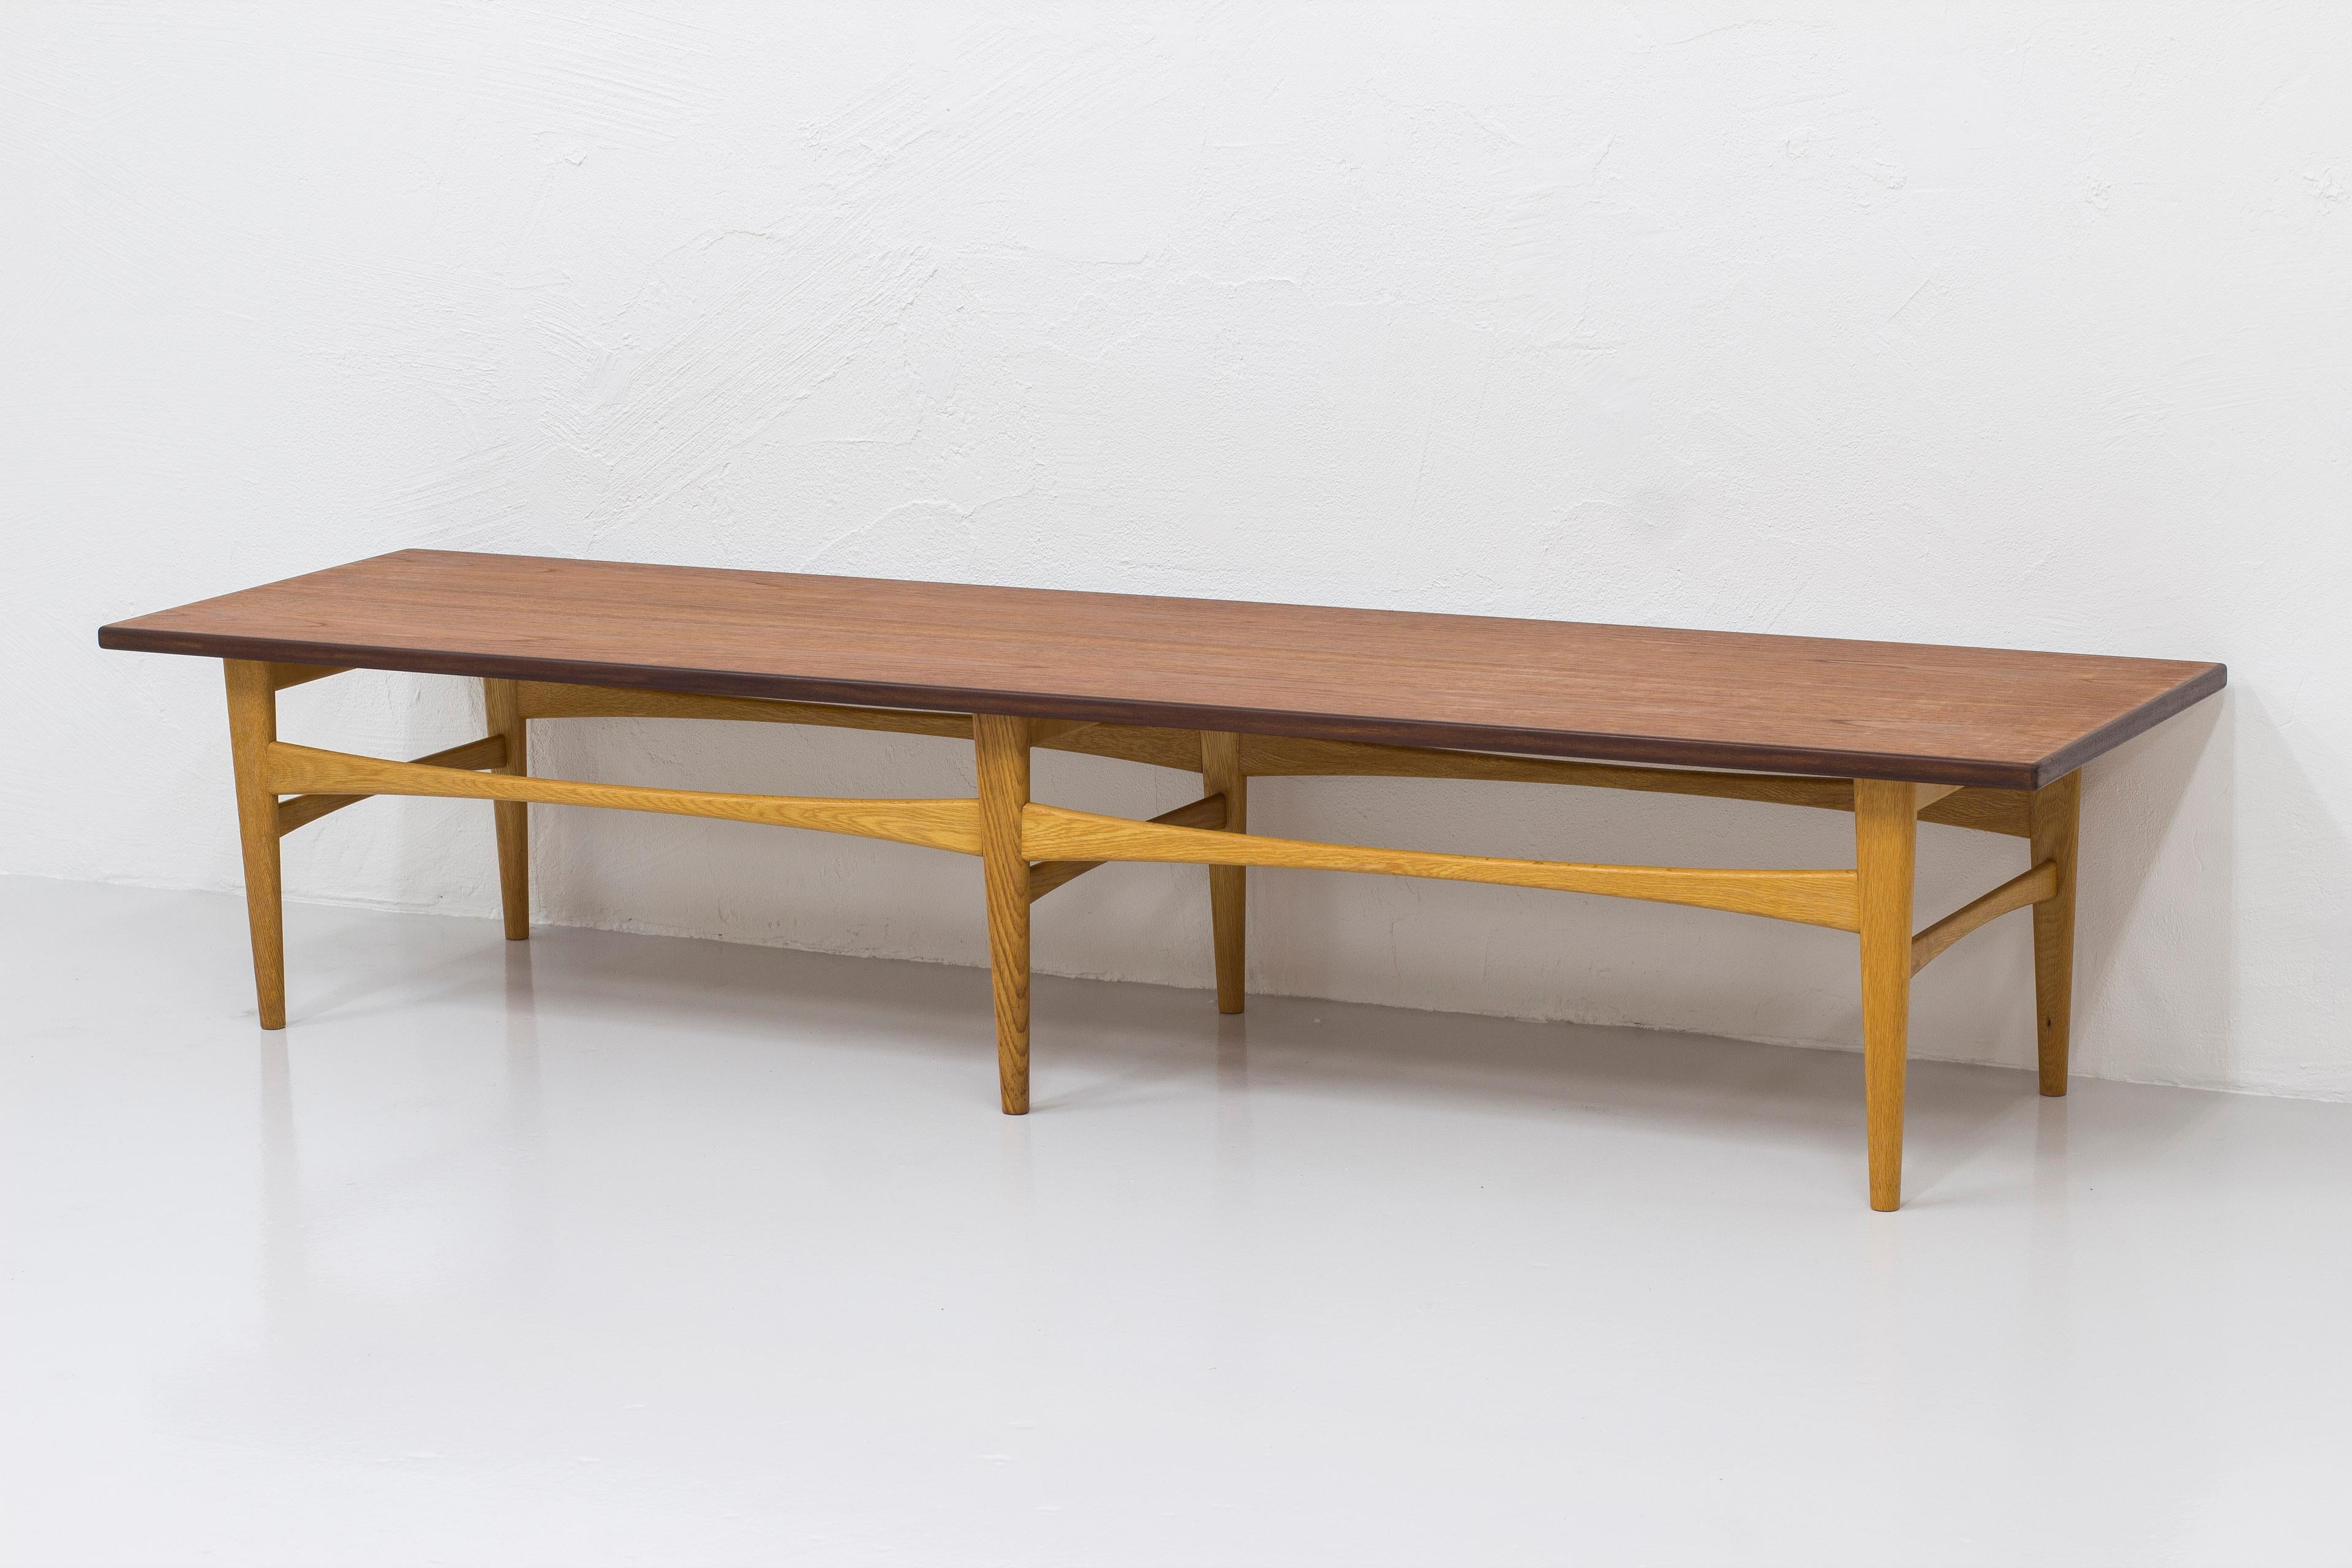 Teak and Oak Bench or Table by Eric Johansson for Abra, Sweden, 1950s For Sale 2